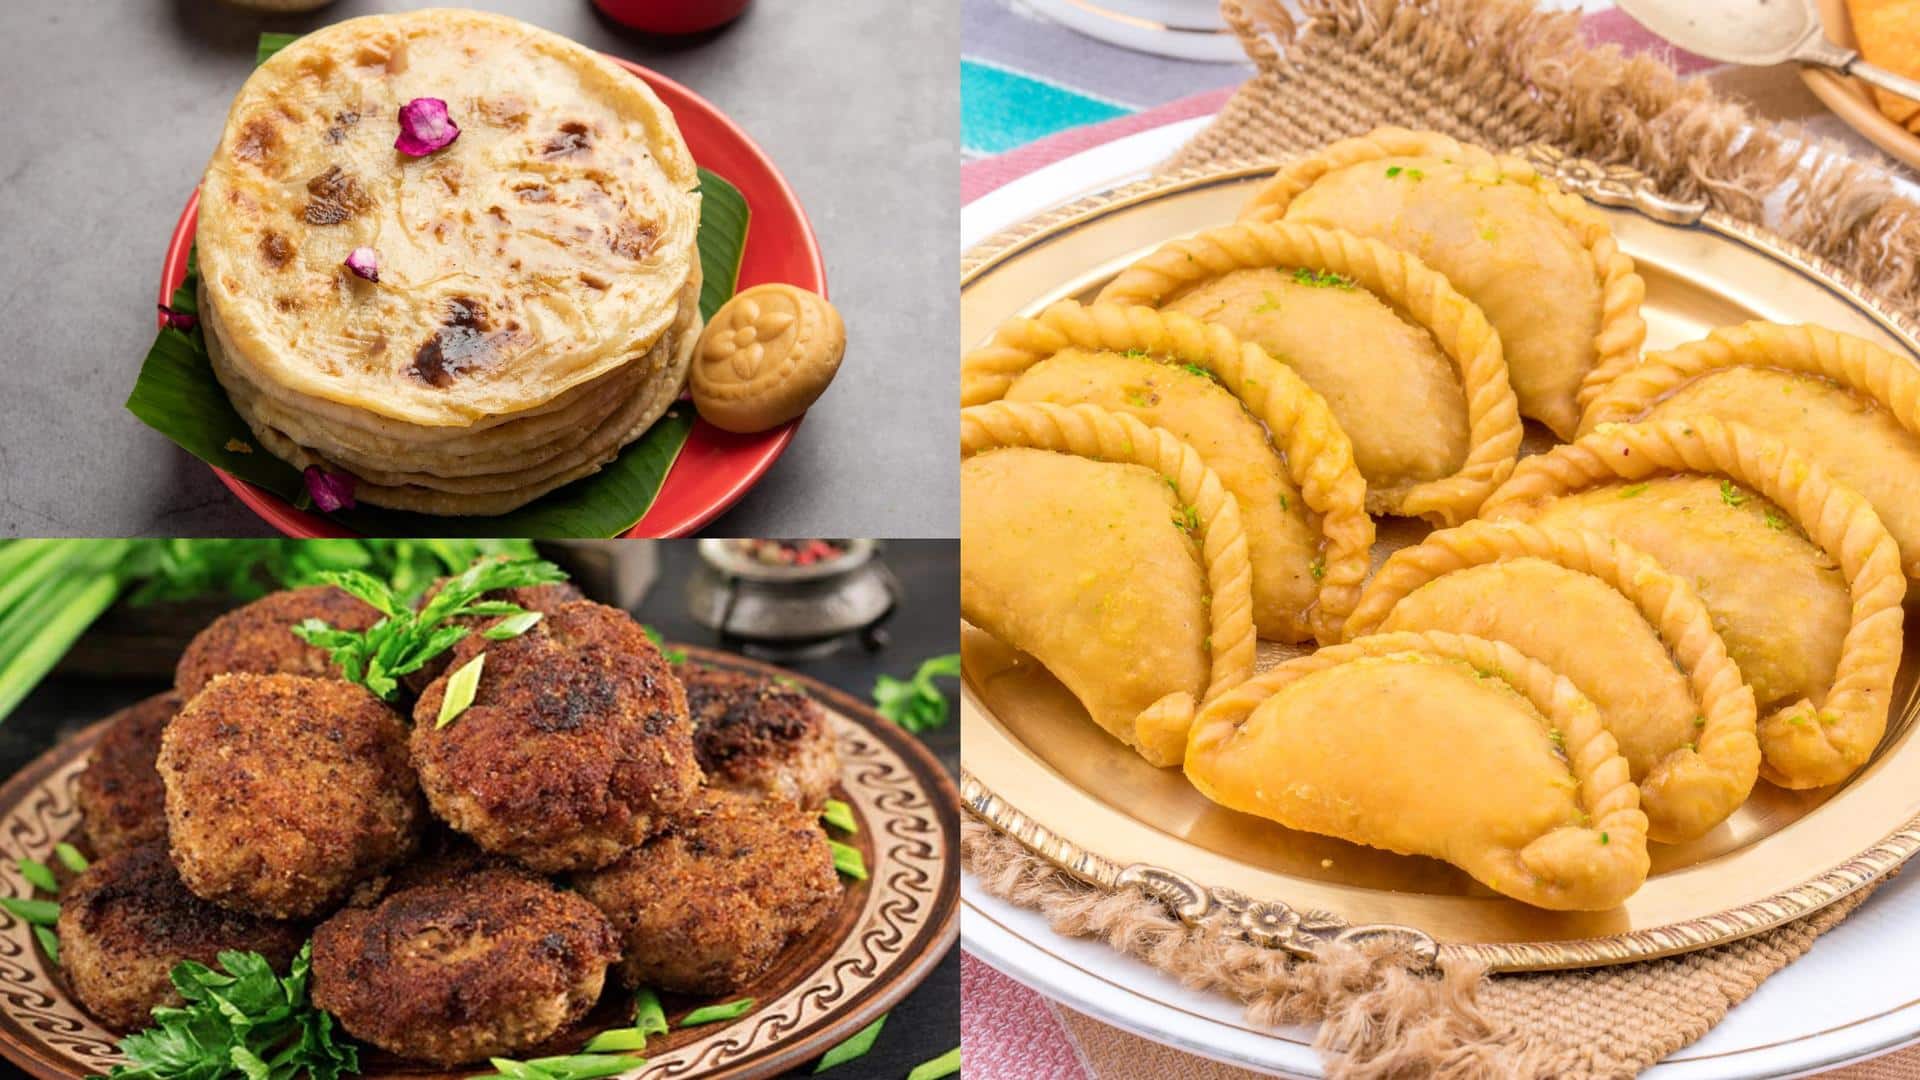 Here are 5 mouth-watering recipes using khoya